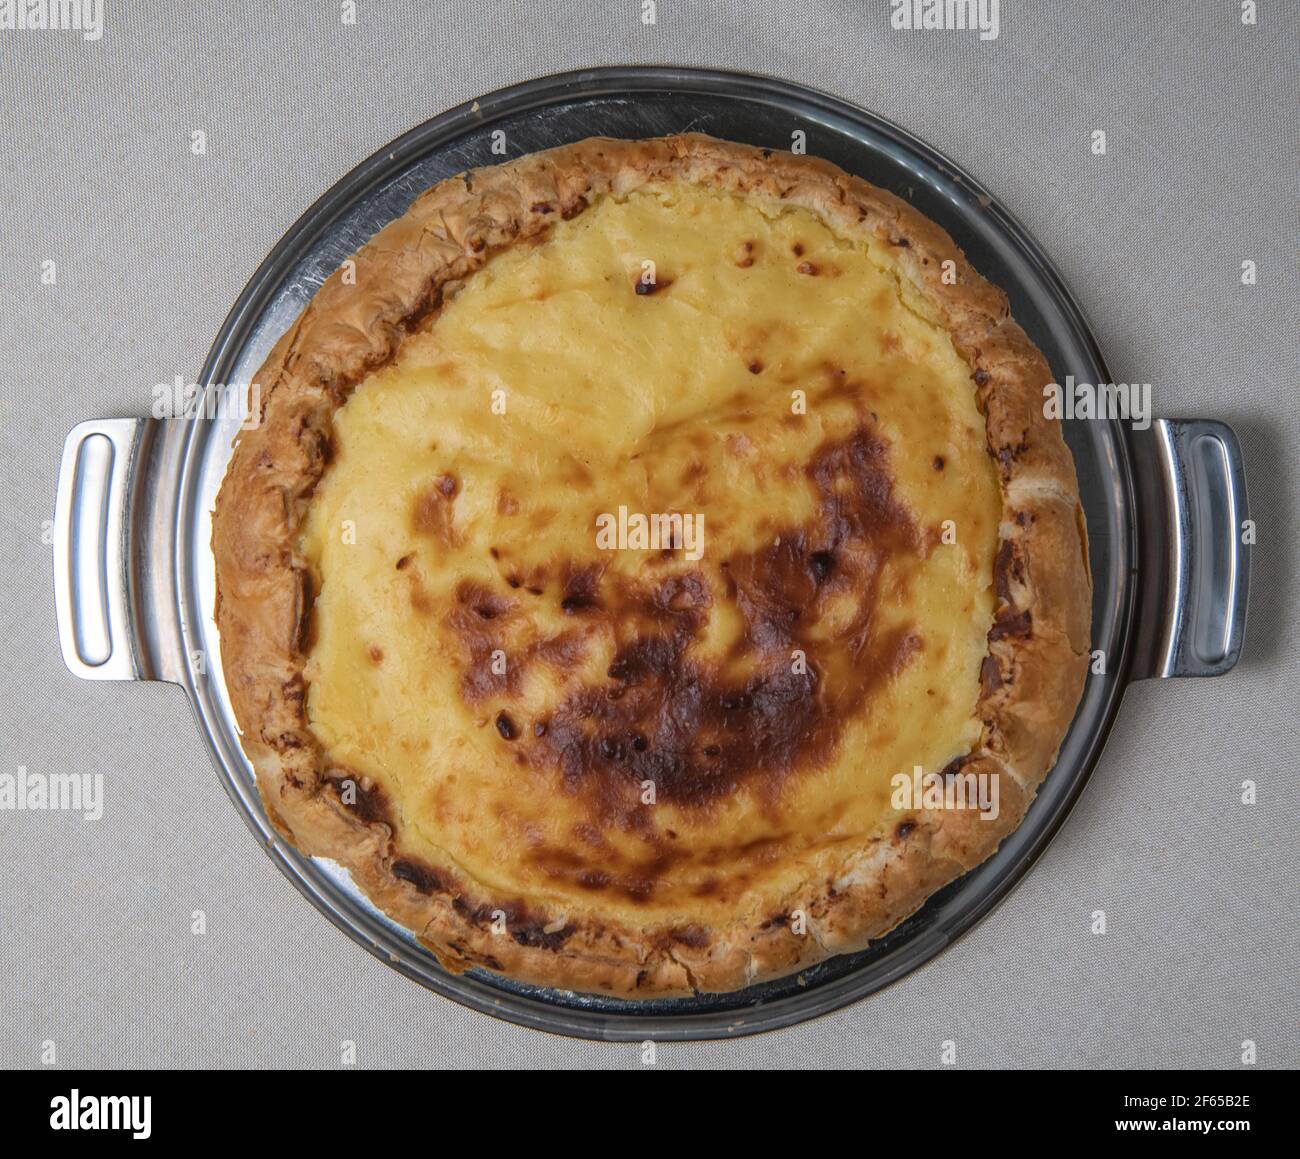 Parisian Flan, cutted classic tart served on a plate copy space Stock Photo